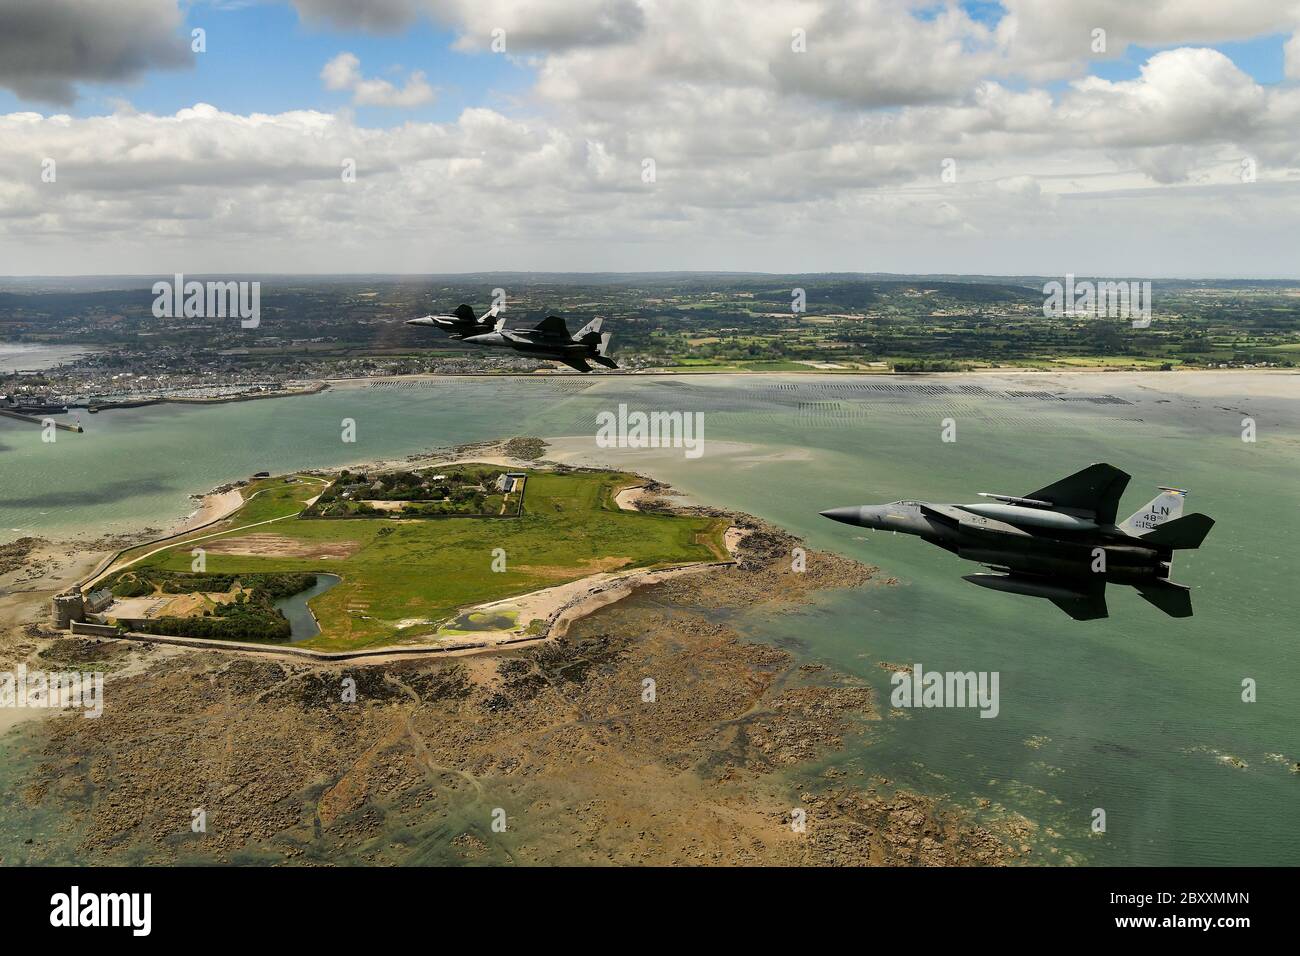 U.S. Air Force F-15 Eagle fighter aircraft, assigned to the 48th Fighter Wing conduct a flypast over the beaches and battle sites to mark the 76th anniversary of D-Day June 6, 2020 in Normandy, France. Stock Photo